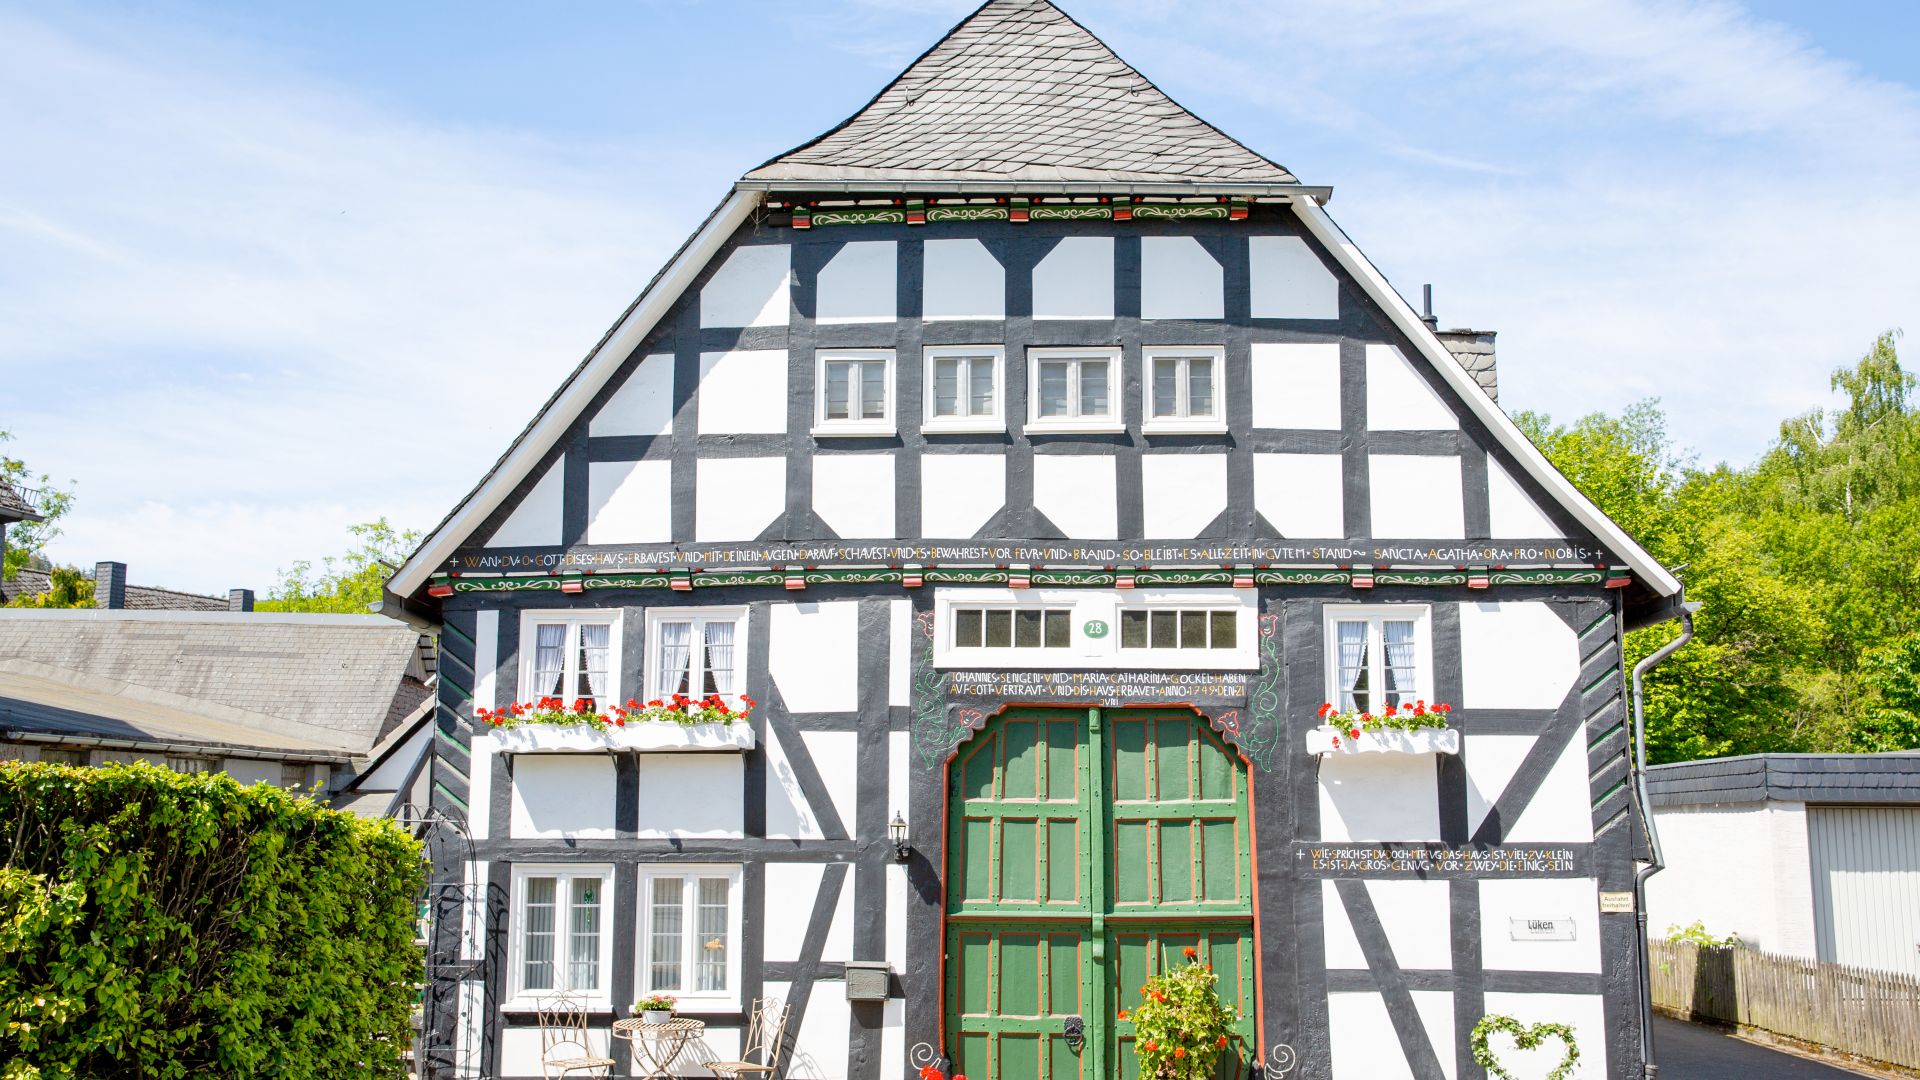 Oslberg: half-timbered house in the district of Assinghausen in the Sauerland region of Germany